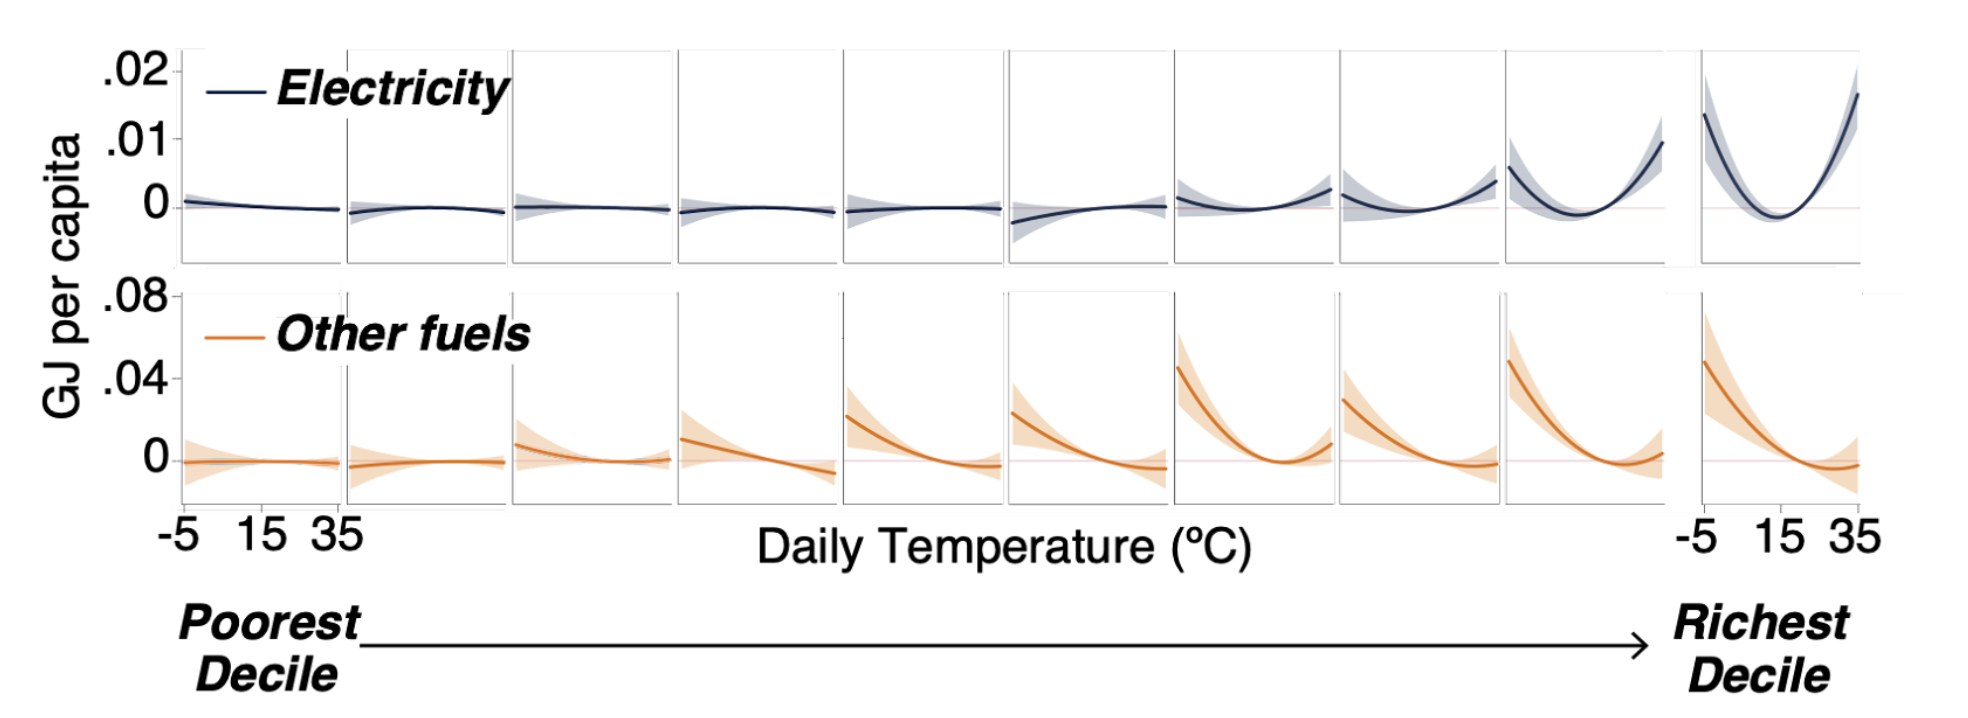 a figure depicting the variability in energy consumption between economic classes at different temperatures